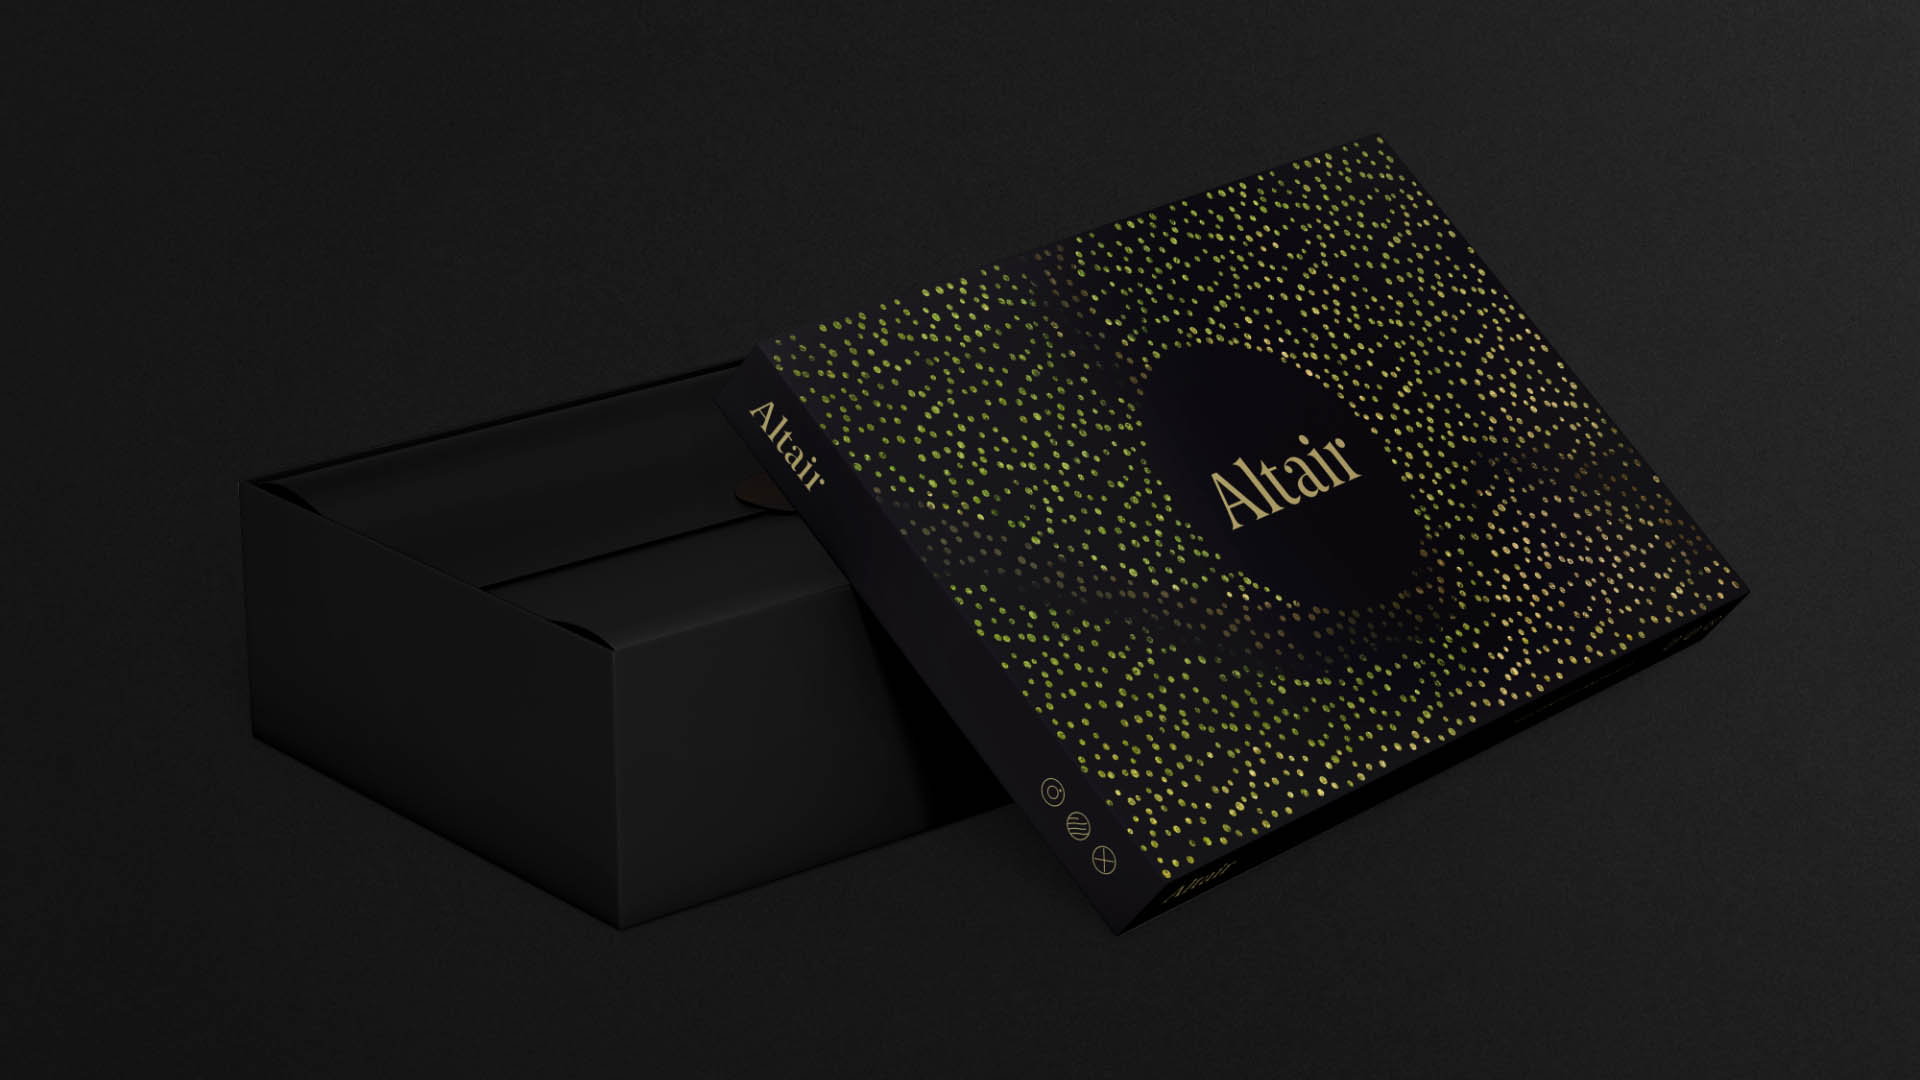 Altair branded box